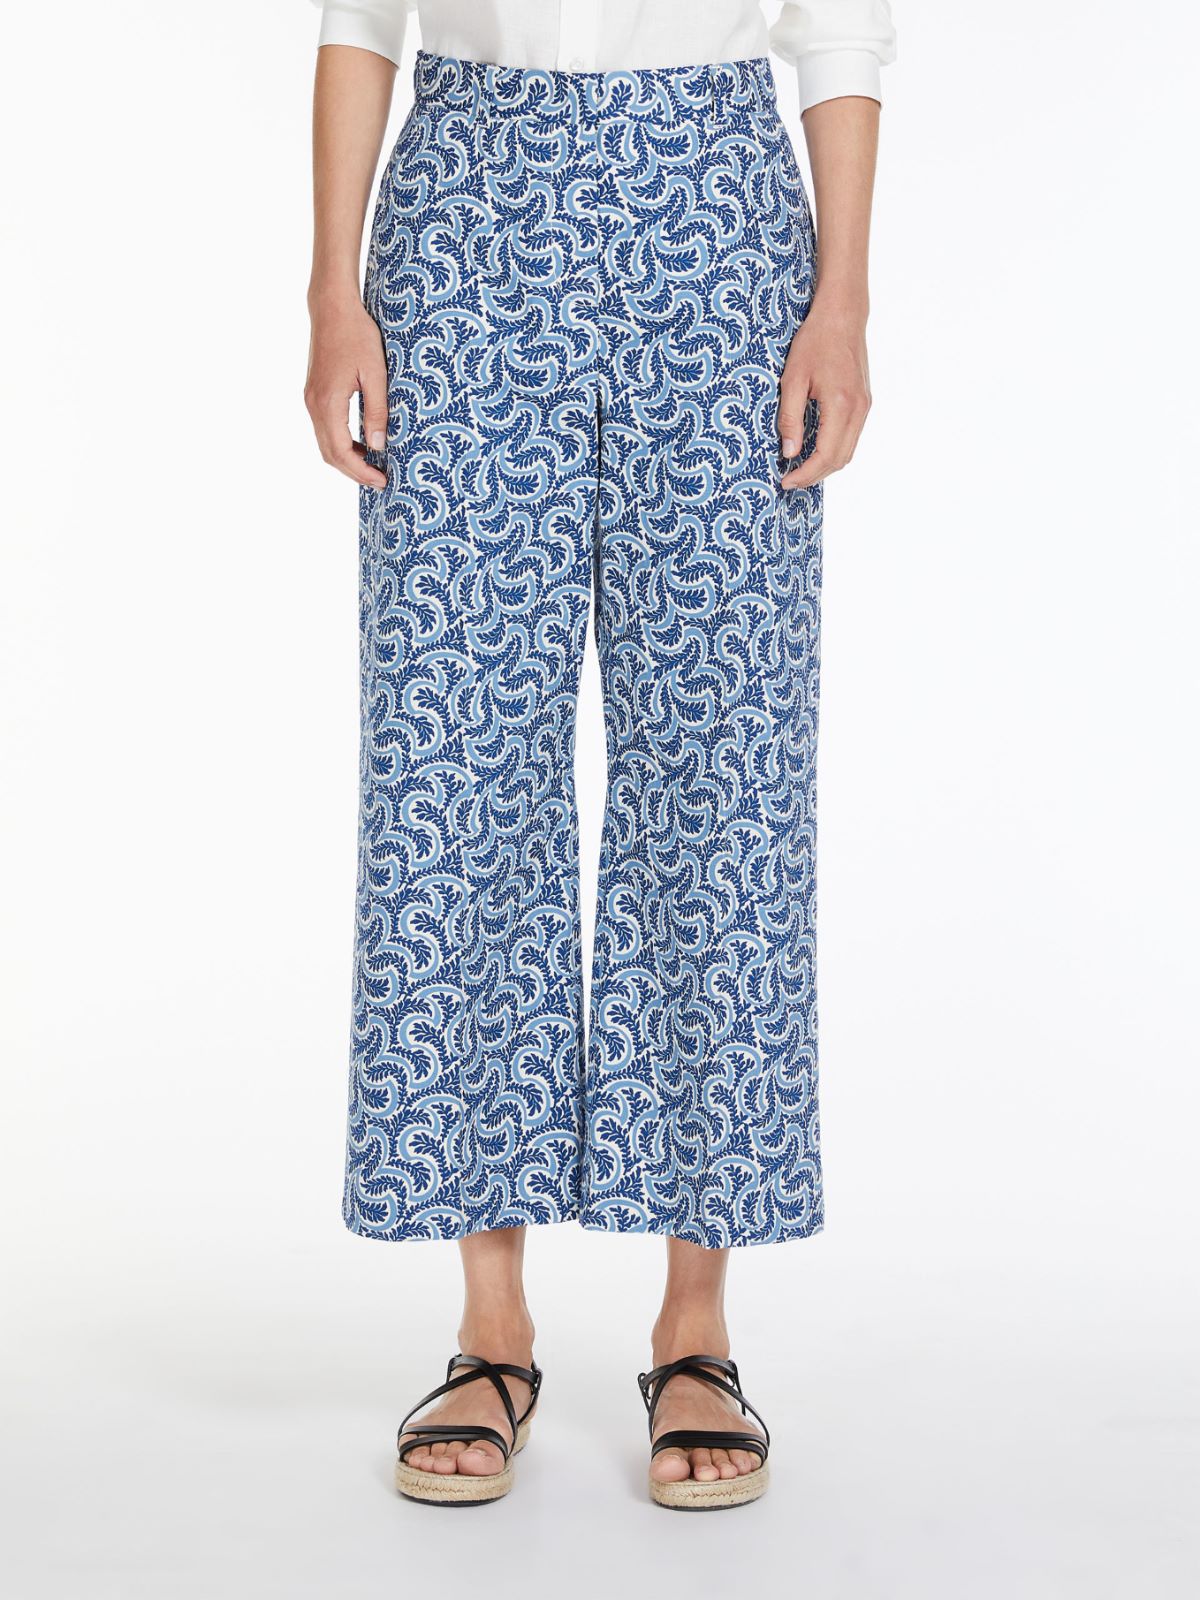 Trousers in printed cotton - LIGHT BLUE - Weekend Max Mara - 2